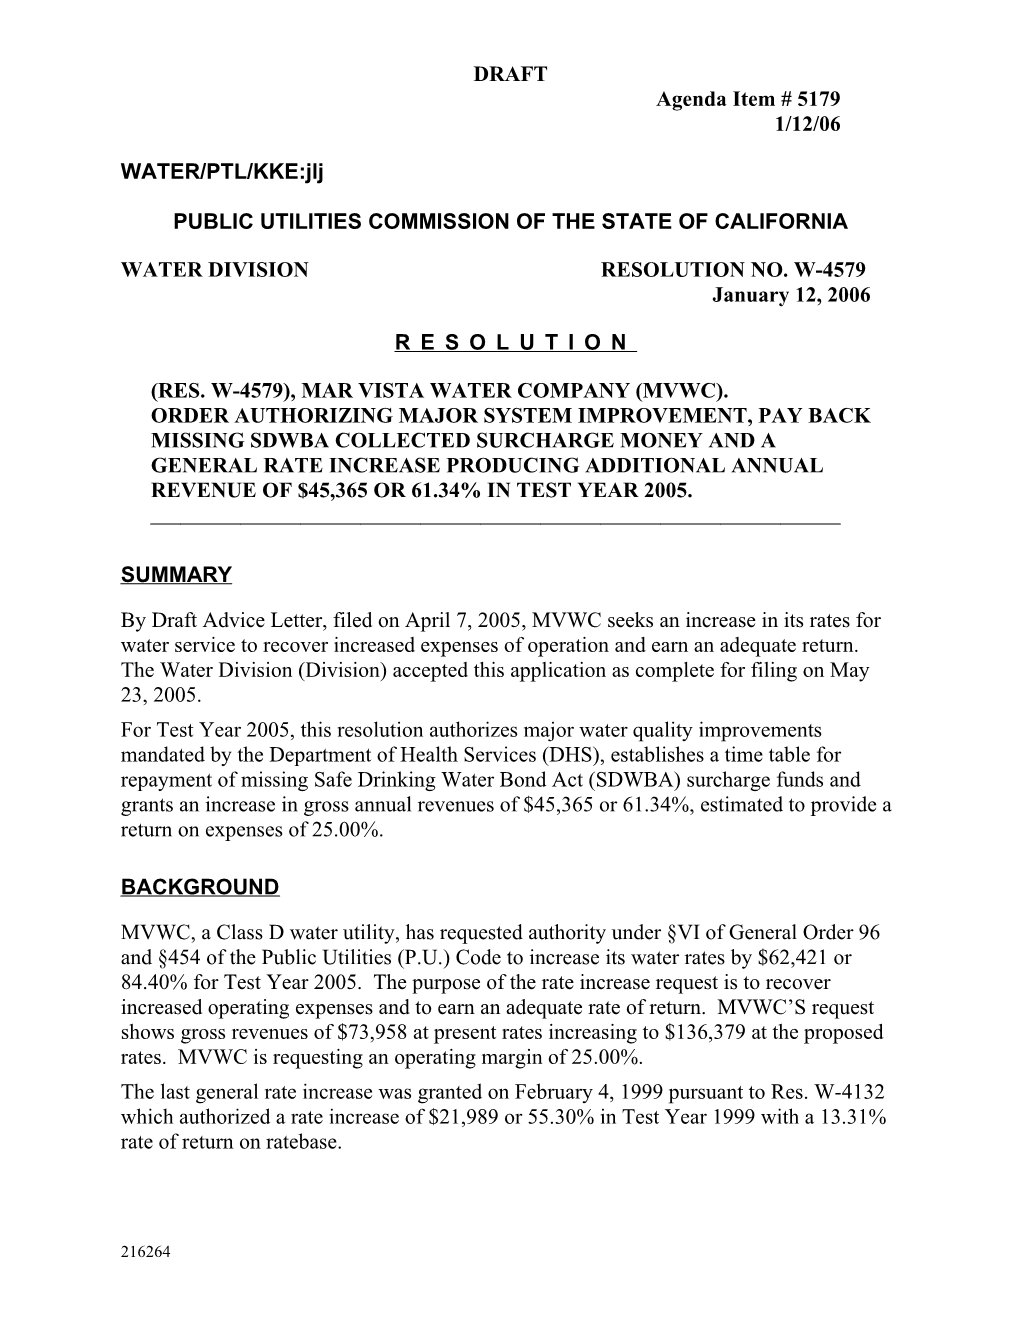 Public Utilities Commission of the State of California s82